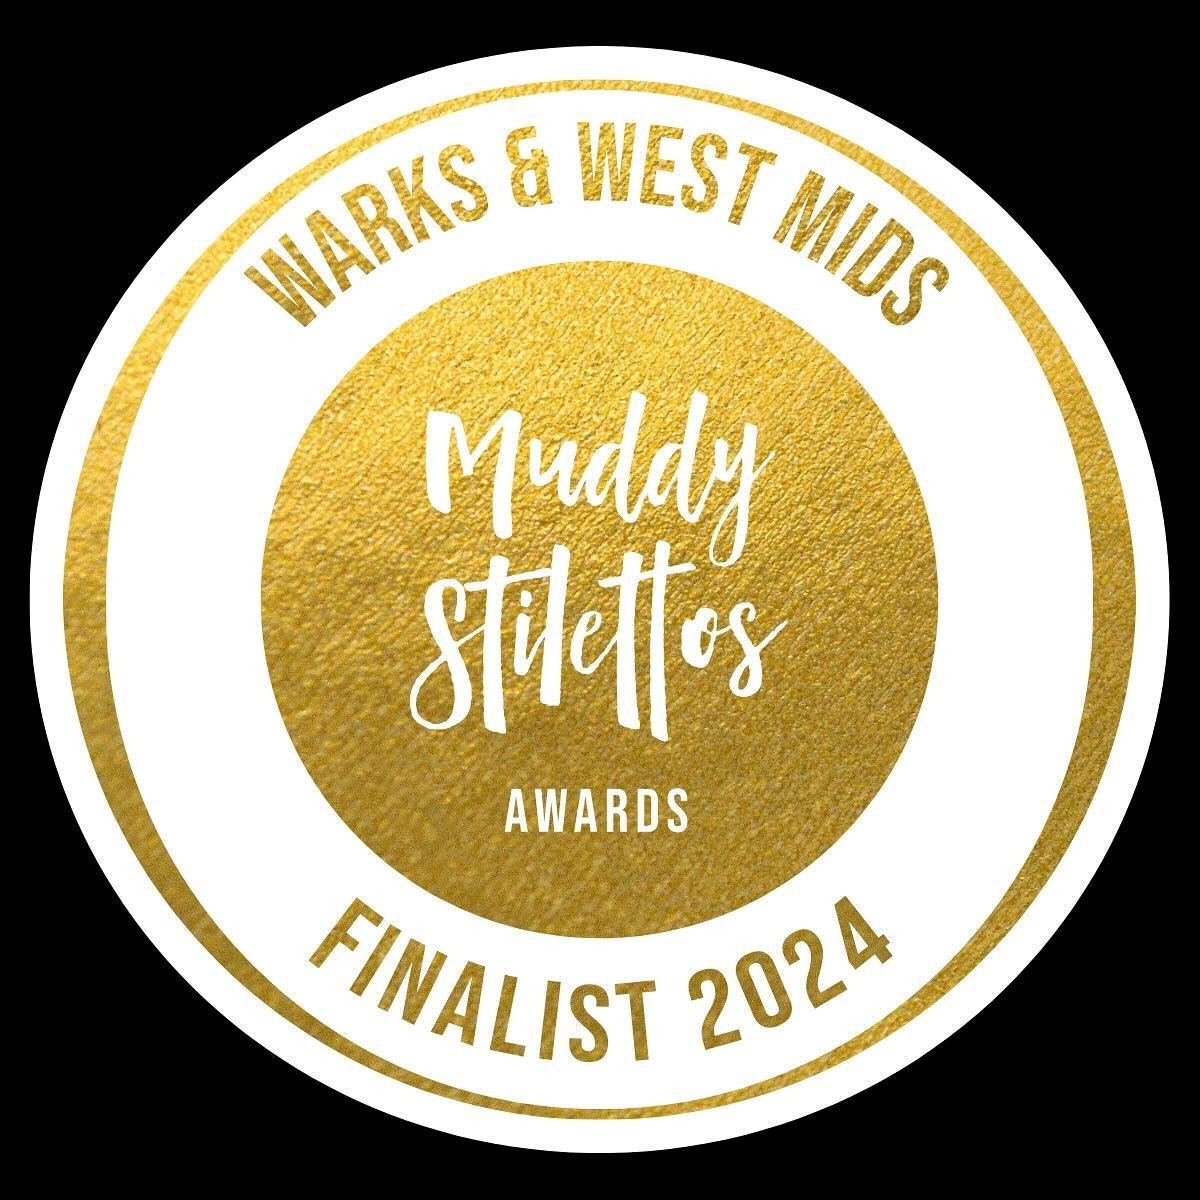 We didn&rsquo;t get the win this time but still really proud to be a @muddywarks finalist for Best Cafe. 

Huge congratulations to all the businesses who won. Special shout out to Best Casual Dining winner  @nanasjapanese who&rsquo;ve supported our b